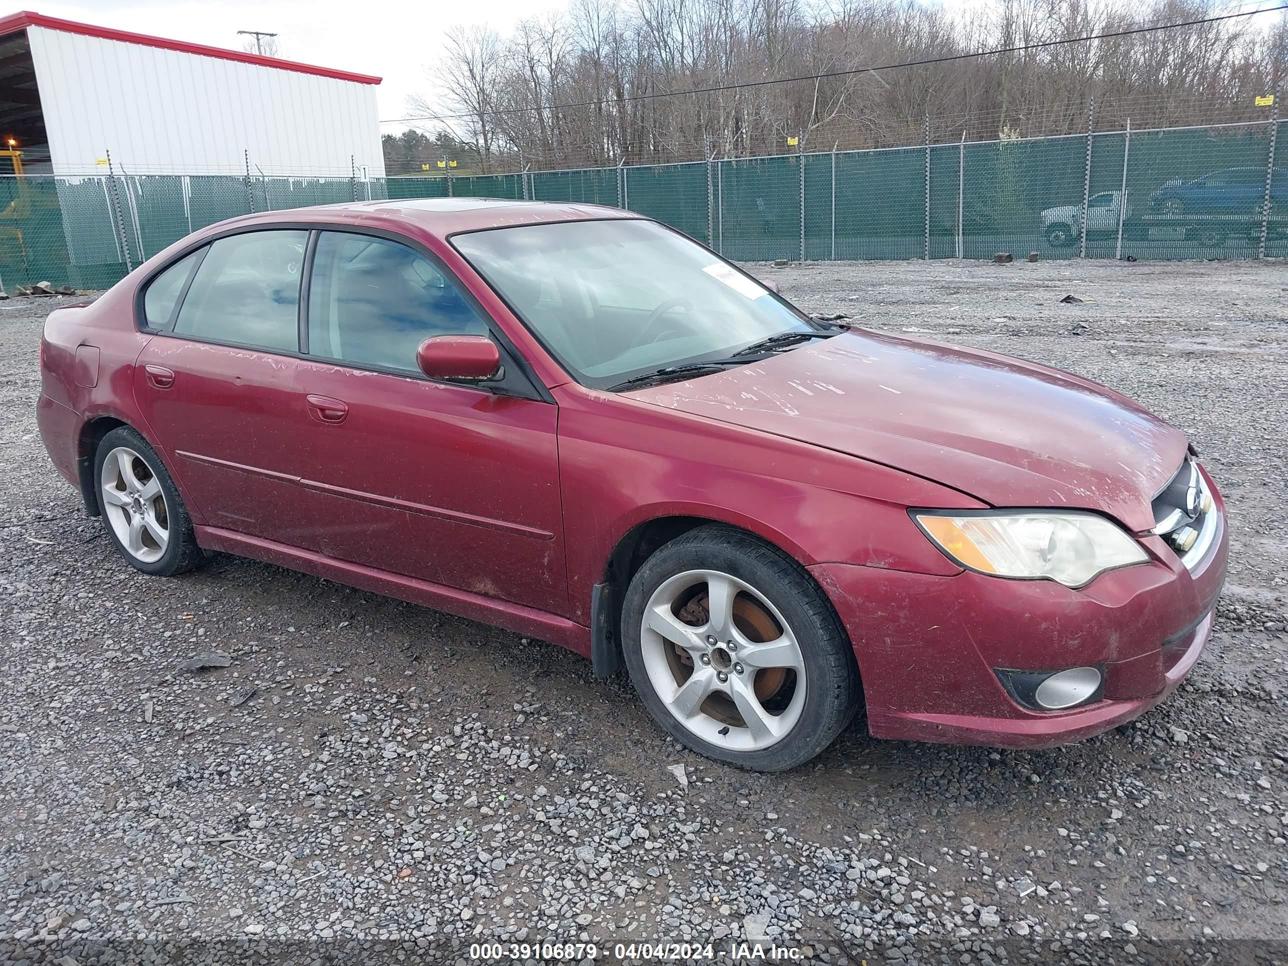 vin: 4S3BL626997217636 4S3BL626997217636 2009 subaru legacy 2500 for Sale in 25918, 4163 Pluto Rd, Shady Spring, West Virginia, USA